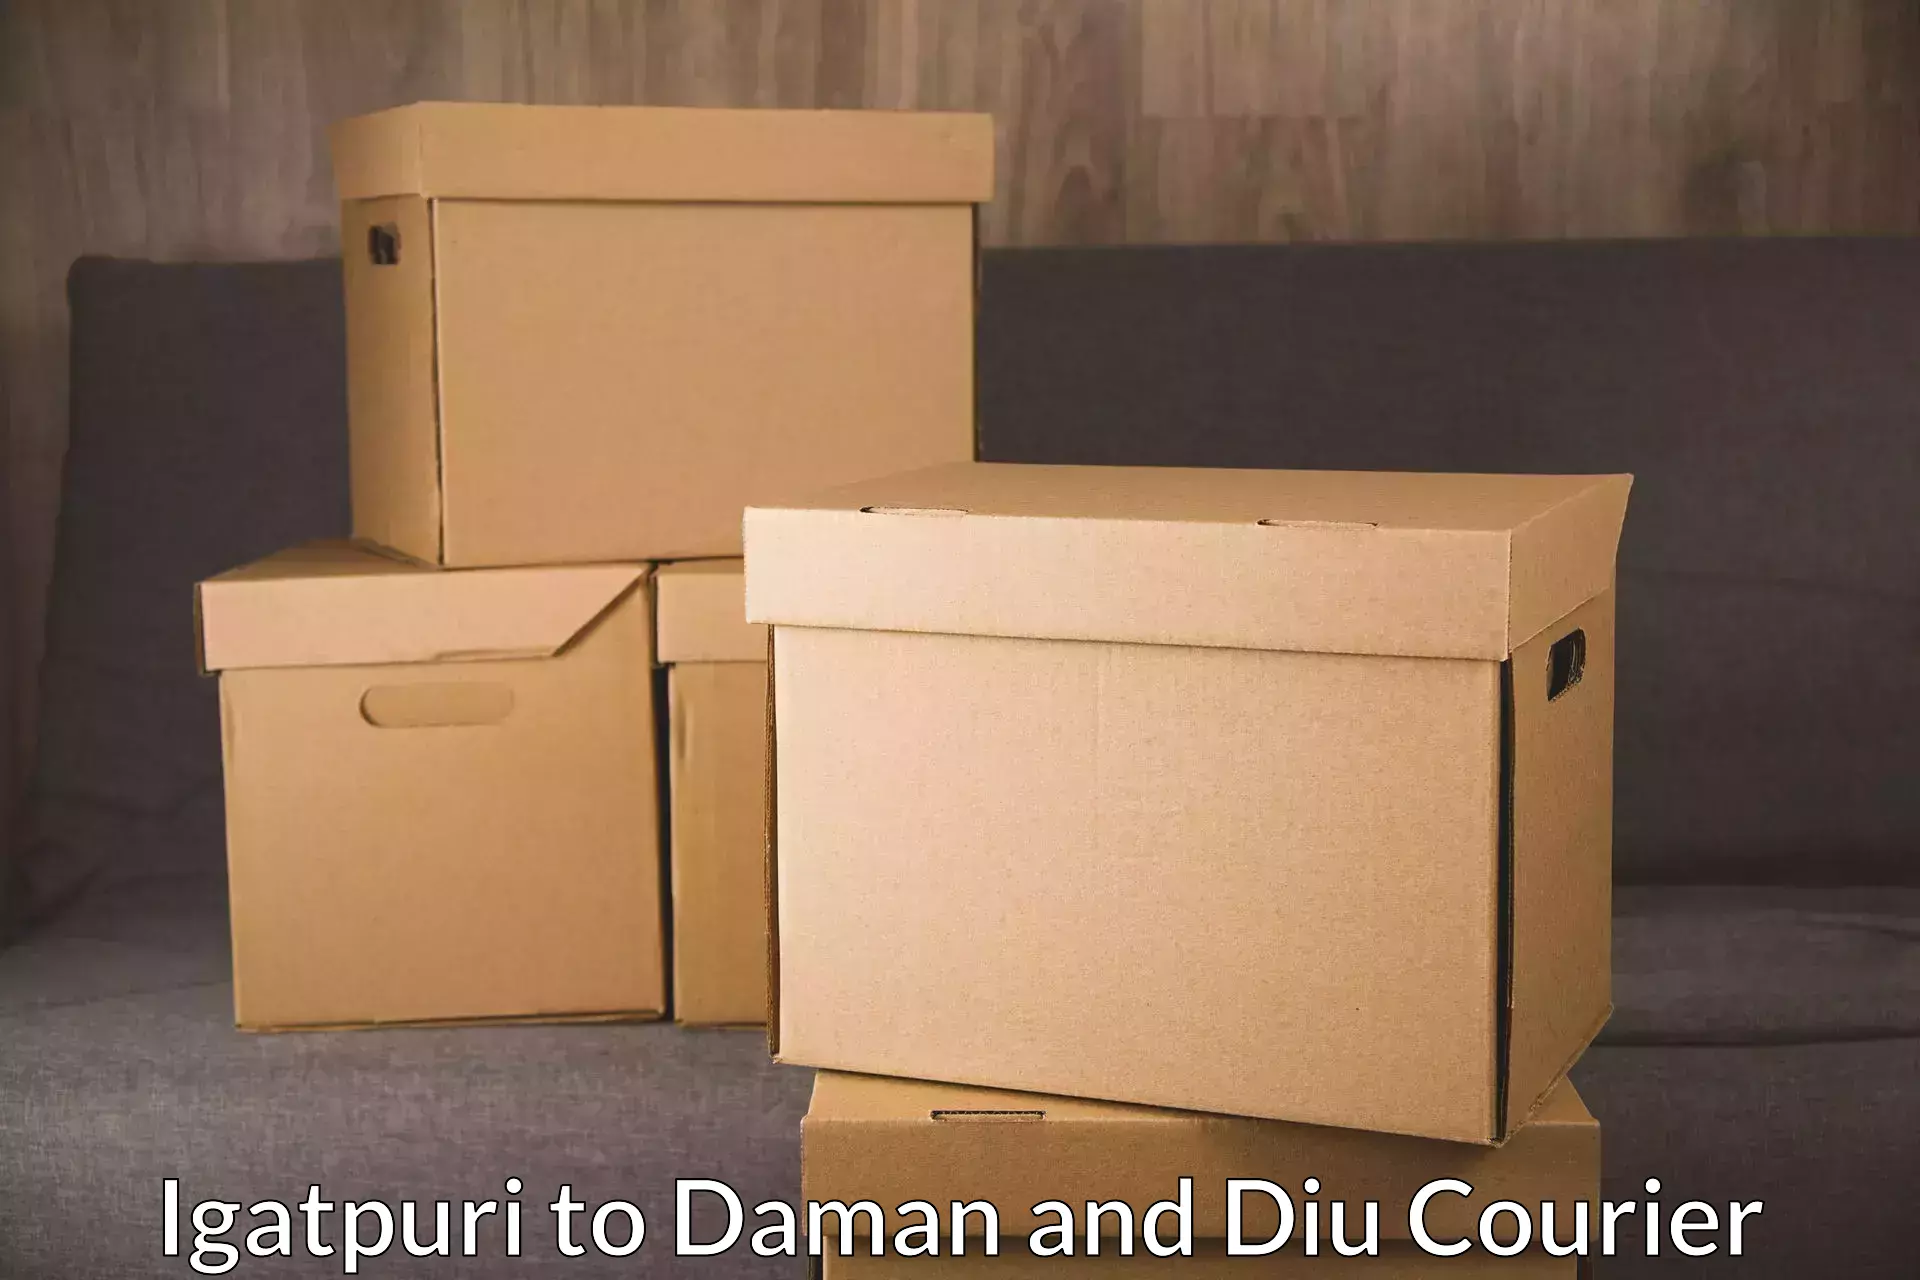 User-friendly courier app Igatpuri to Diu